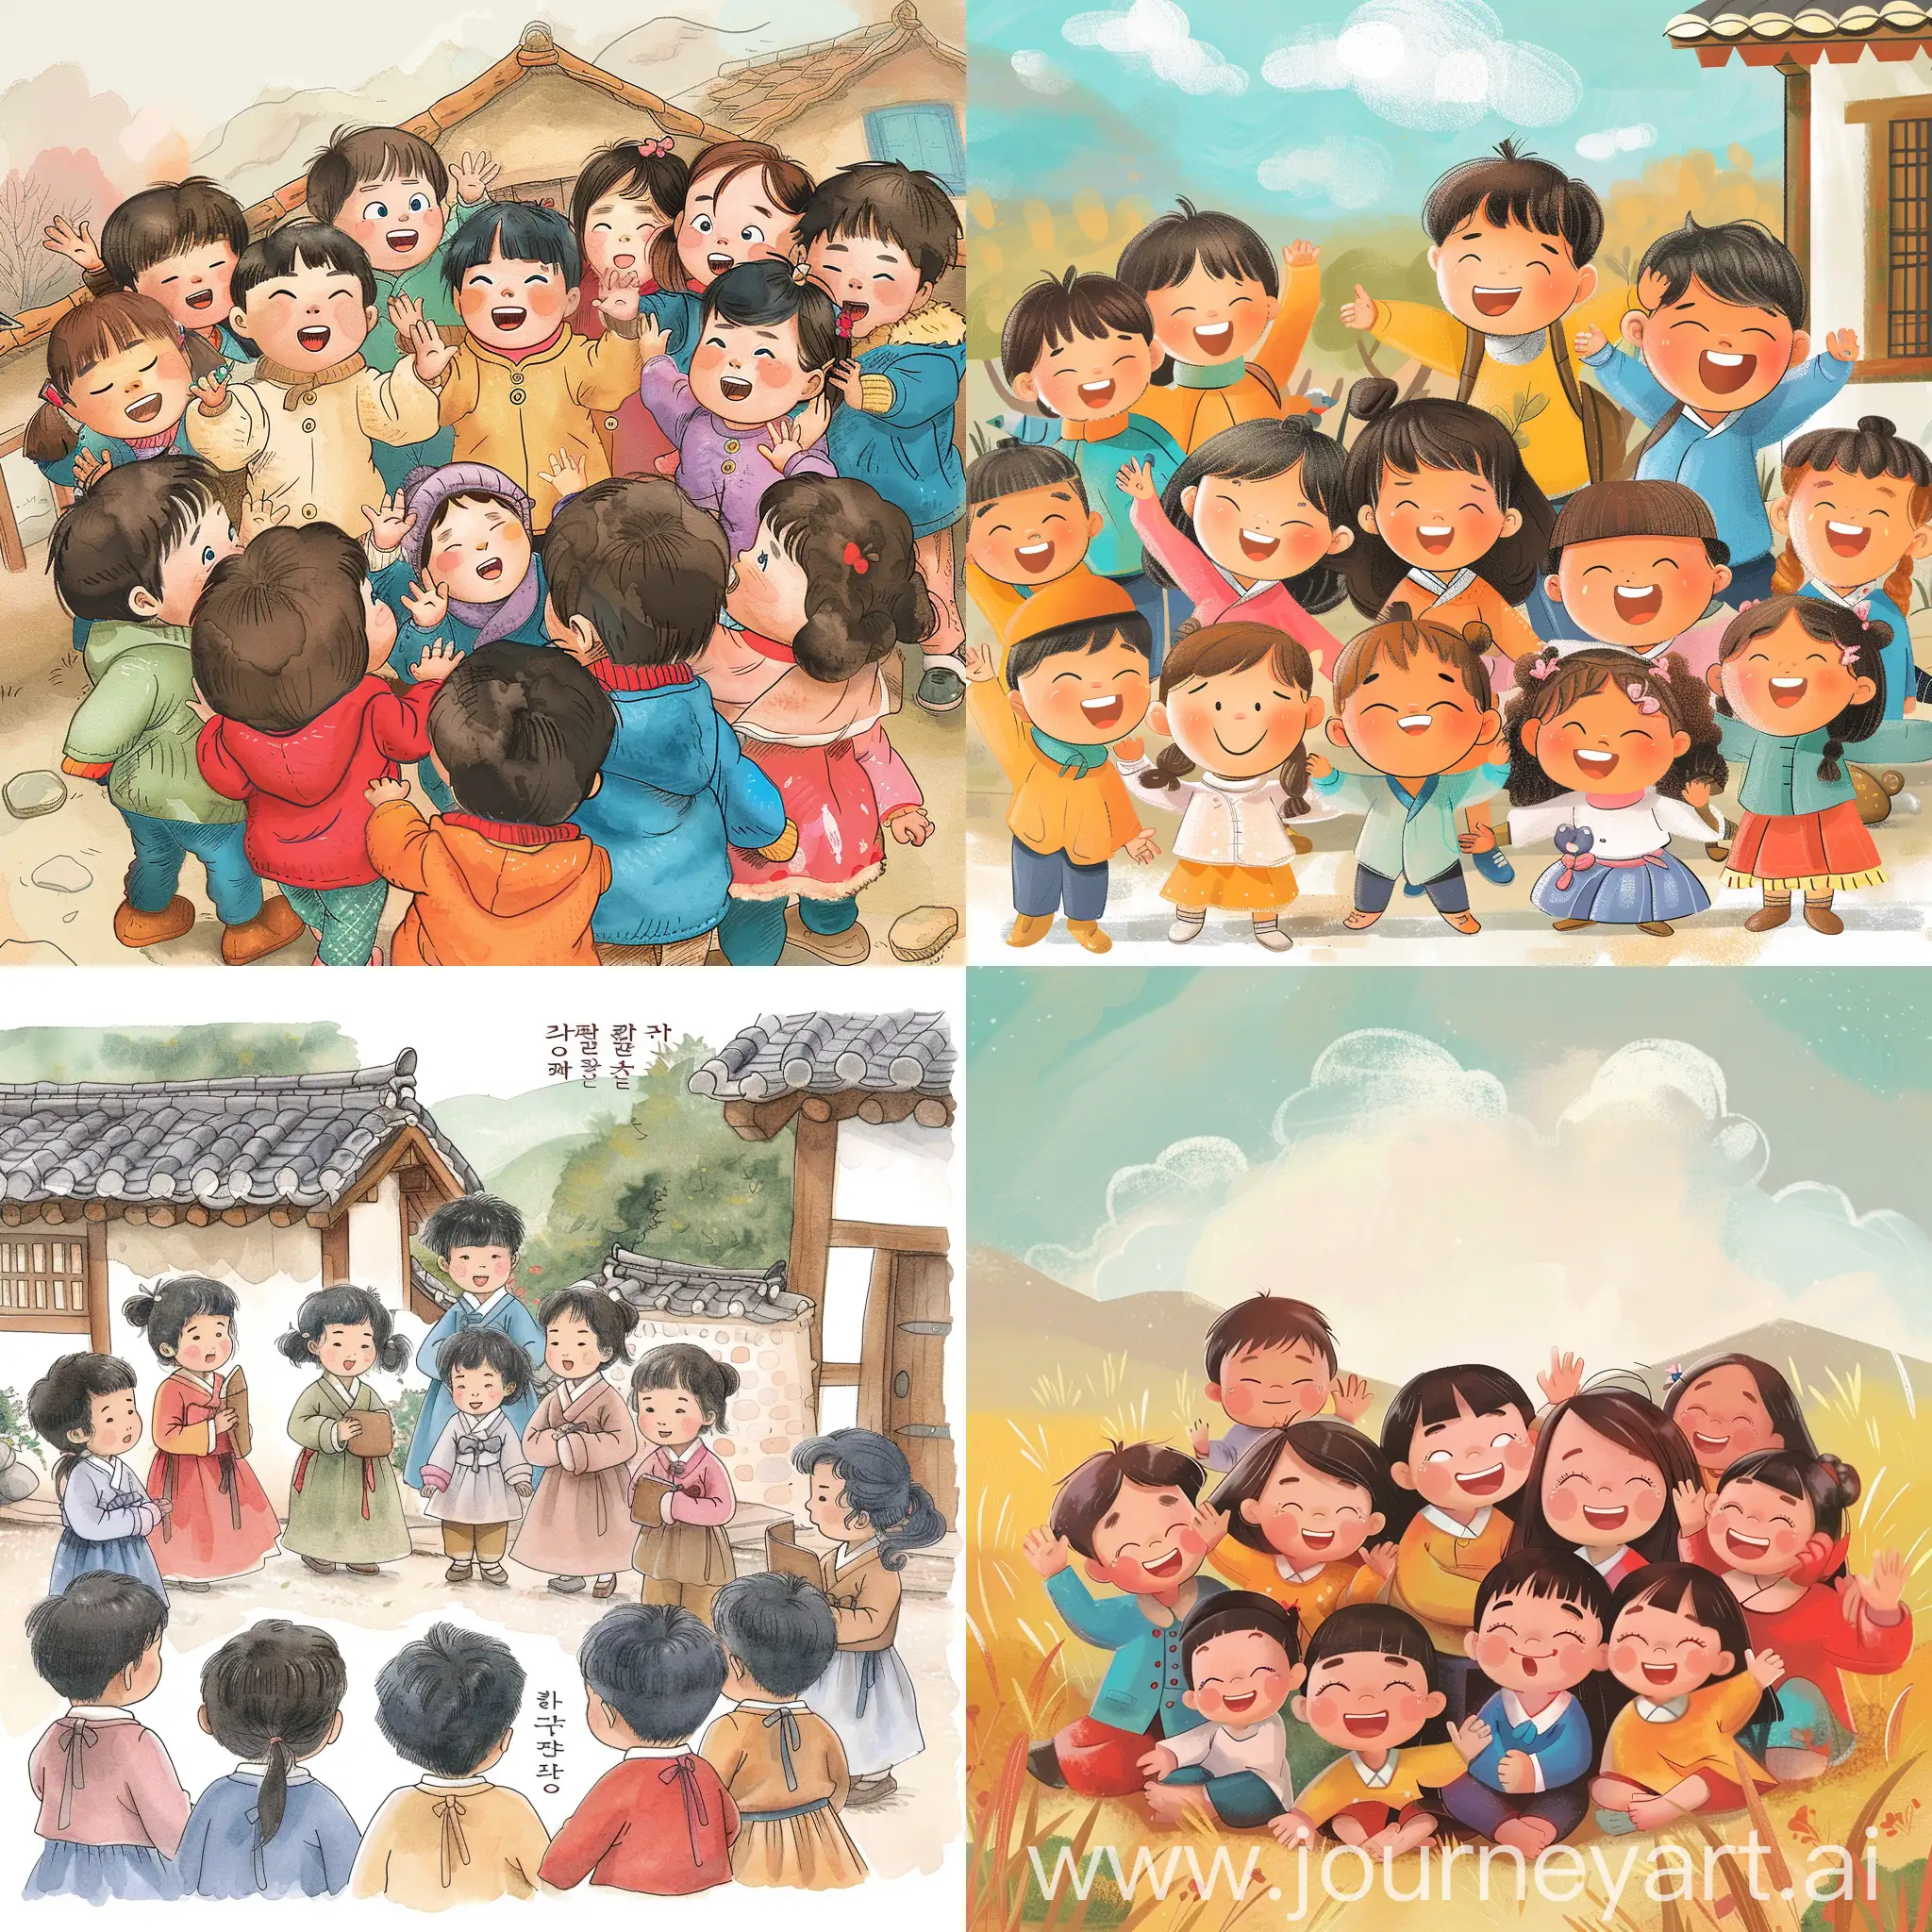 a children's storybook image with korea children gathered together and being positive